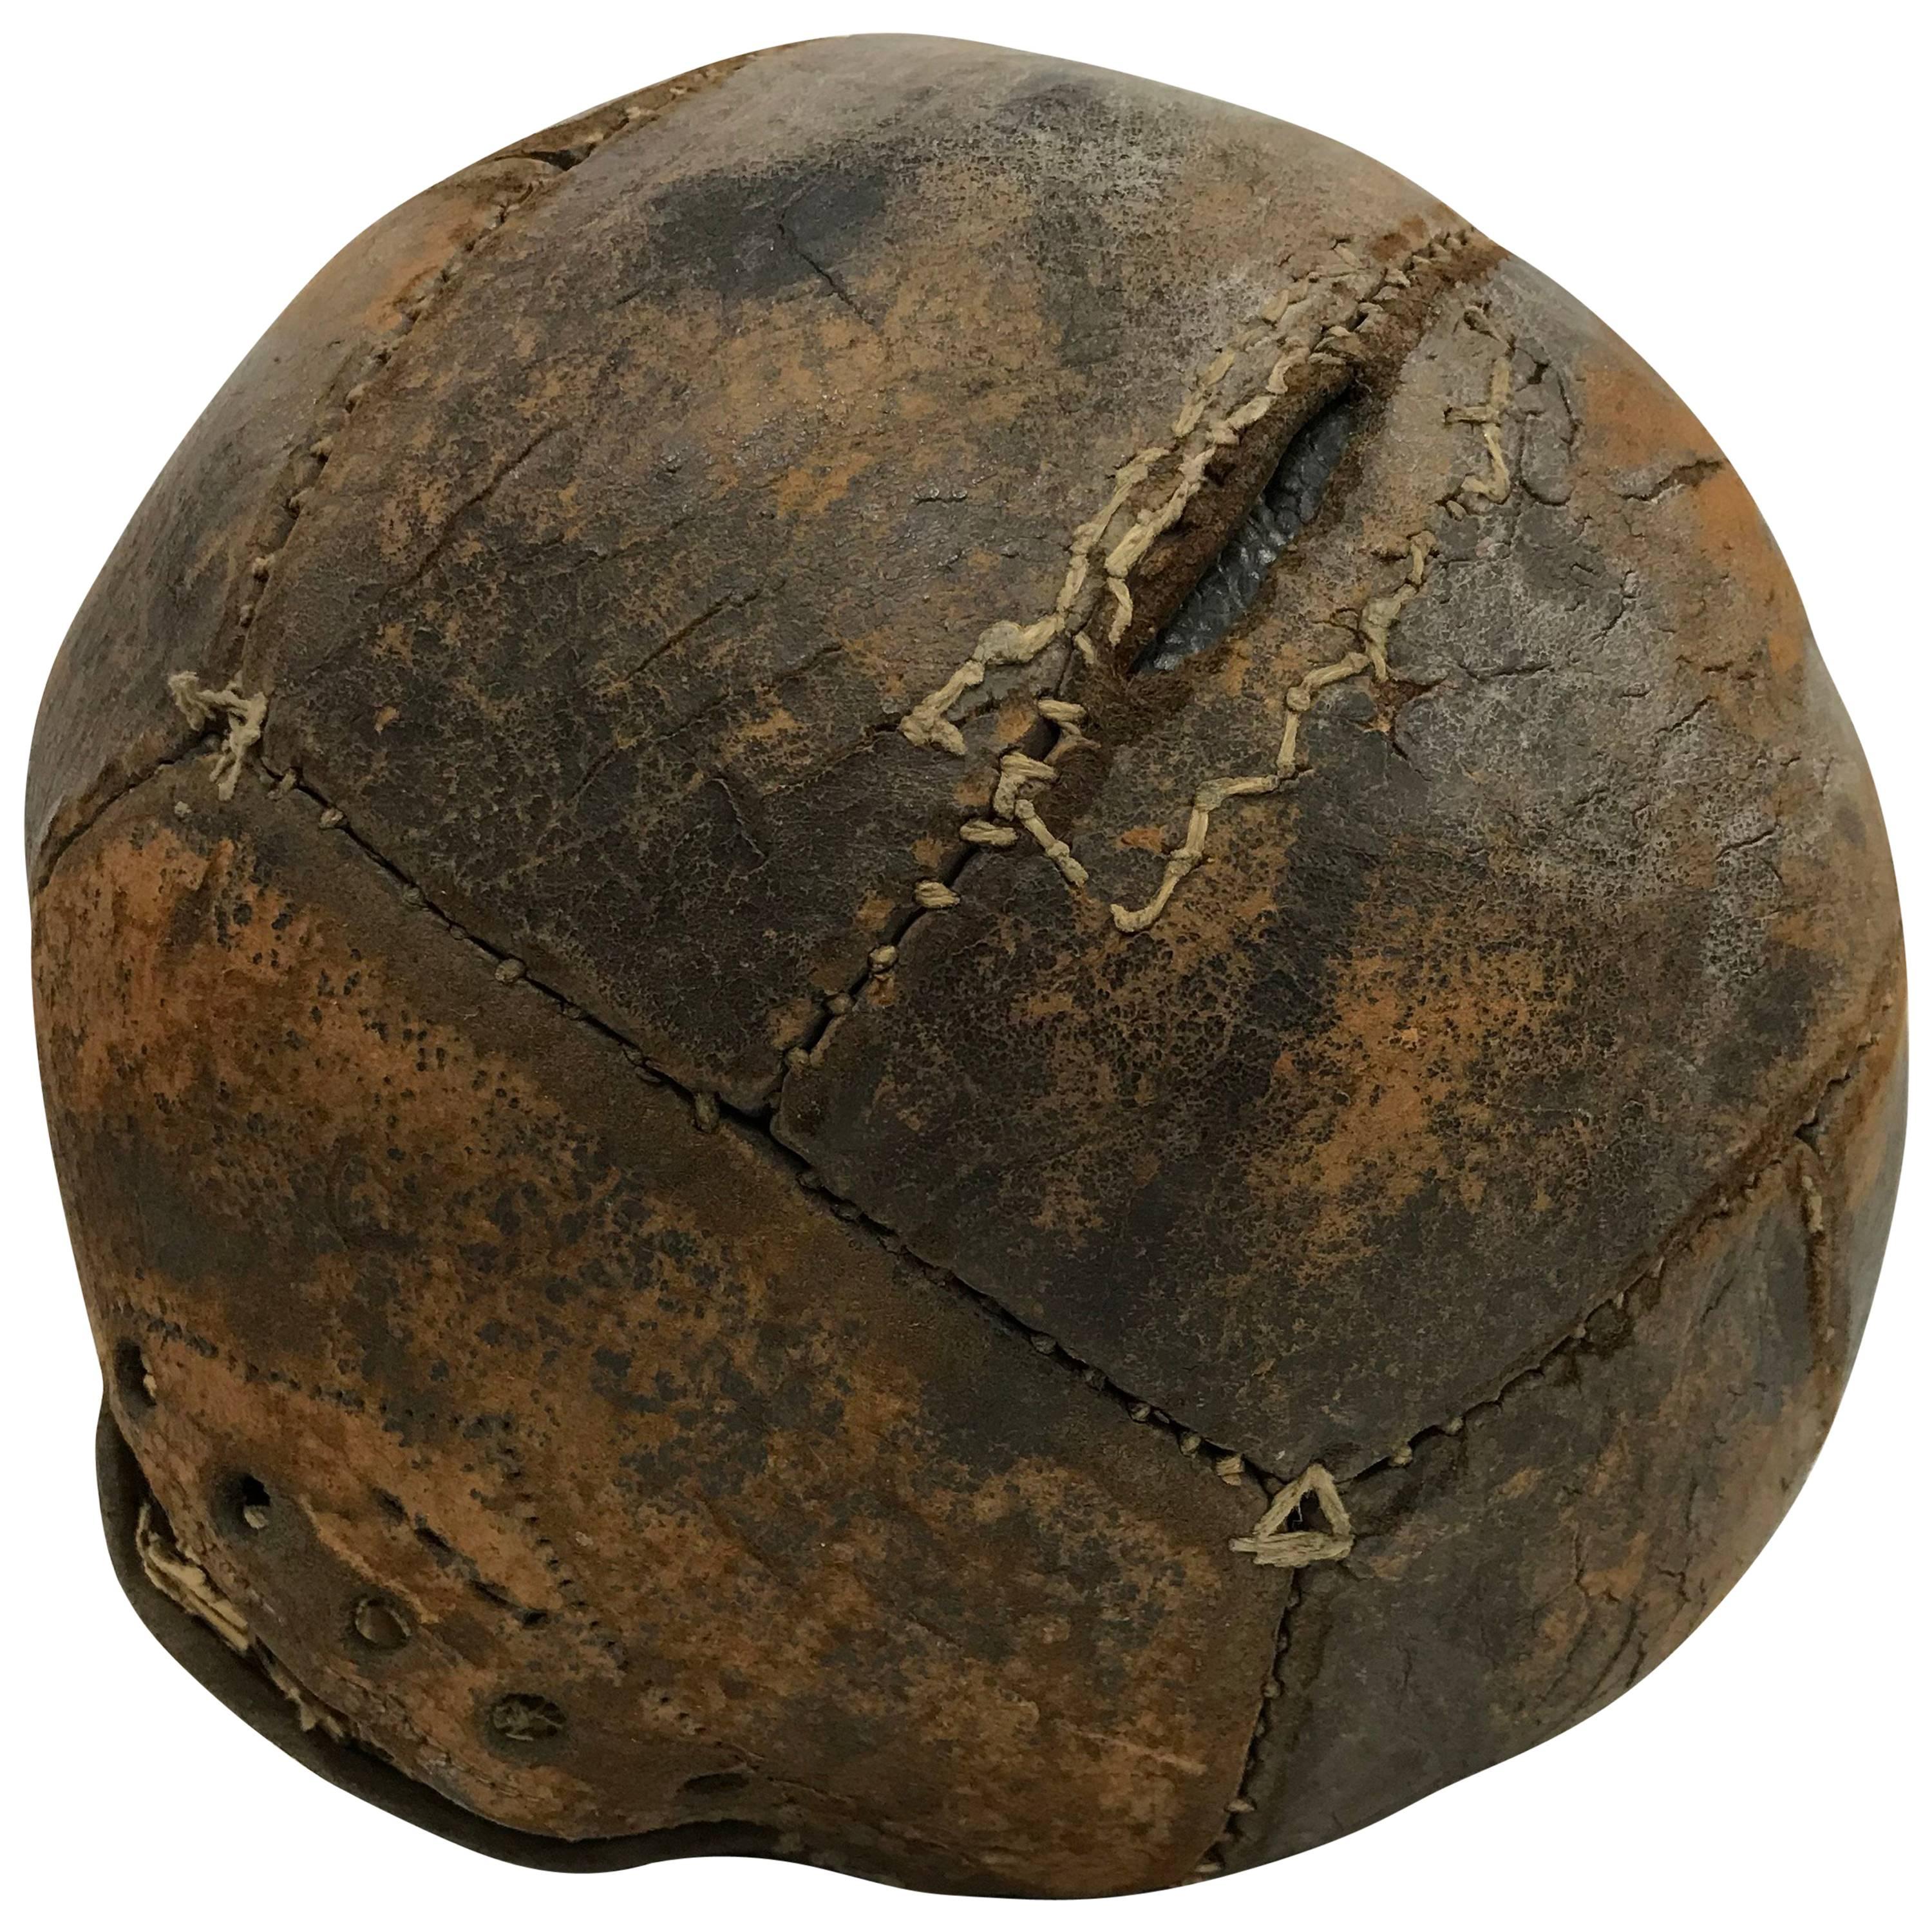 Antique Leather Medicine Ball with Great Vintage Patina